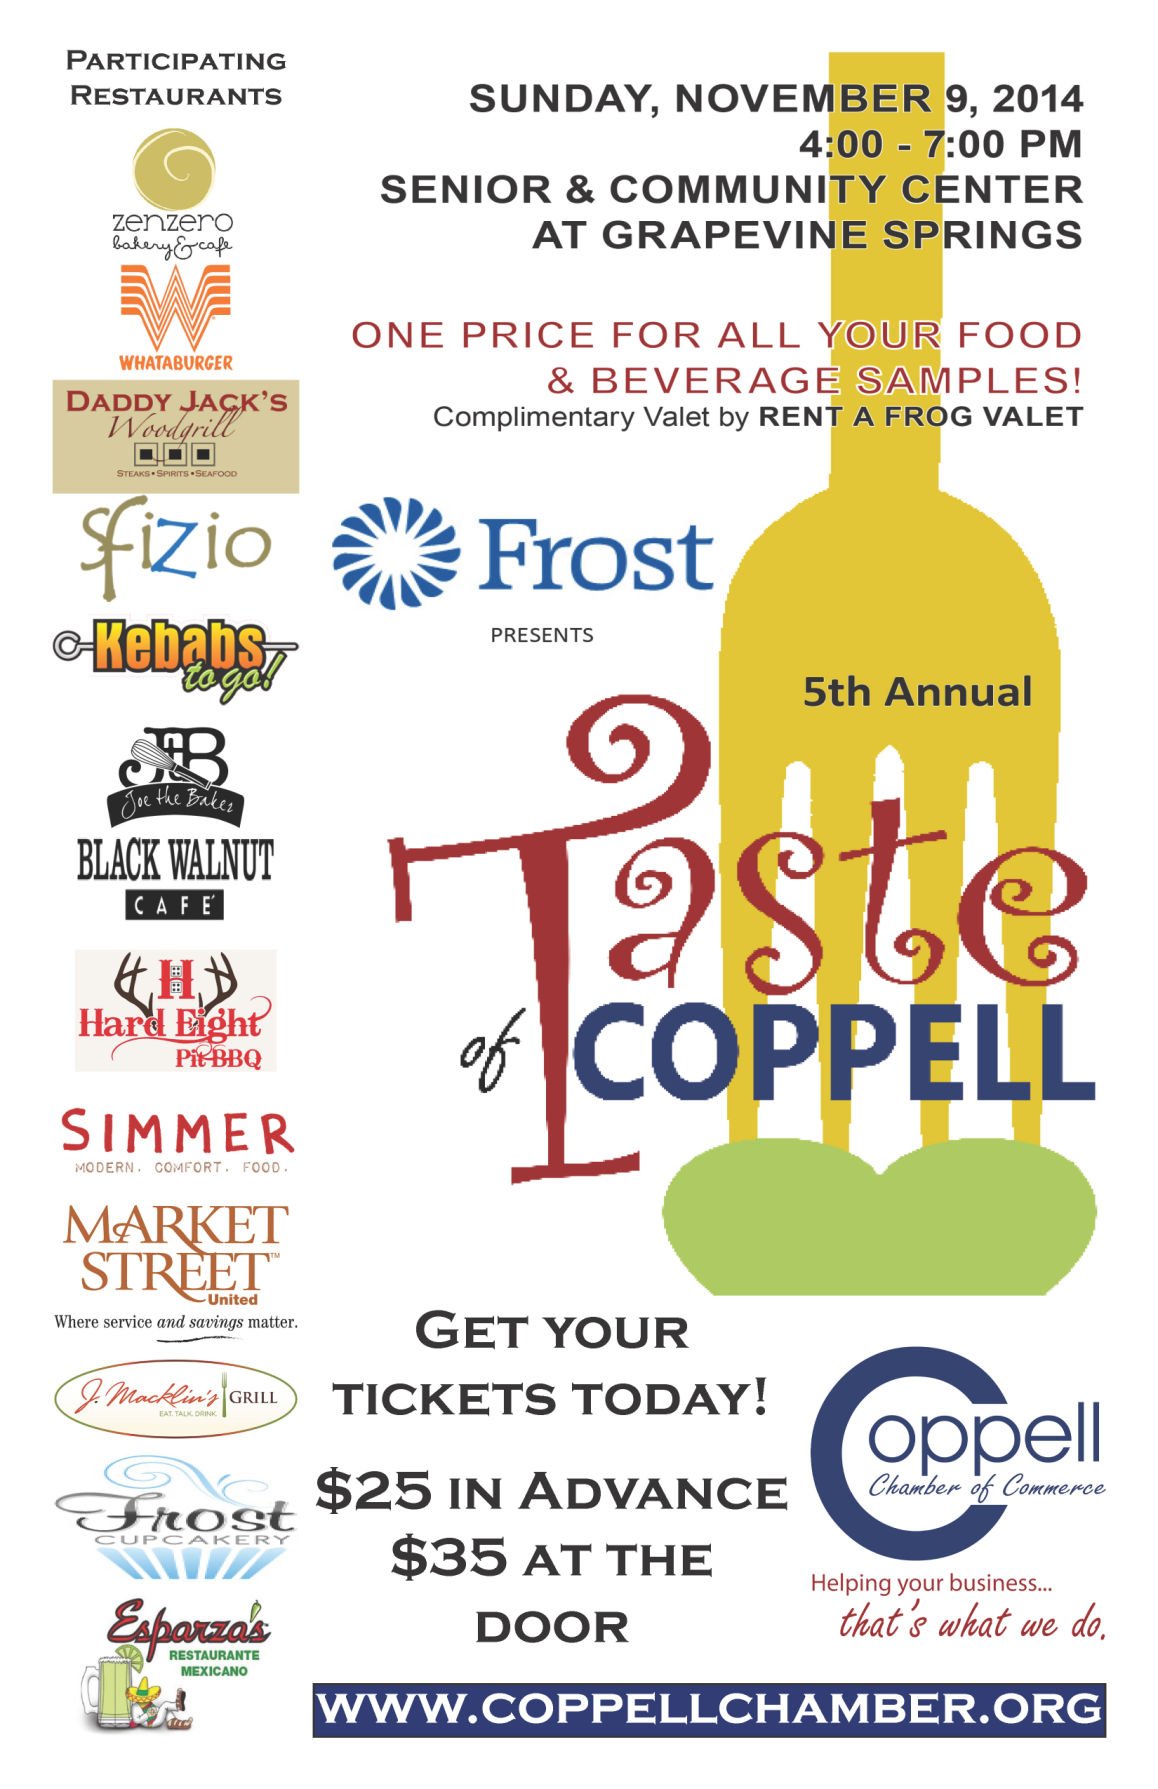 Taste of the town Taste of Coppell to be held Sunday Coppell Gazette